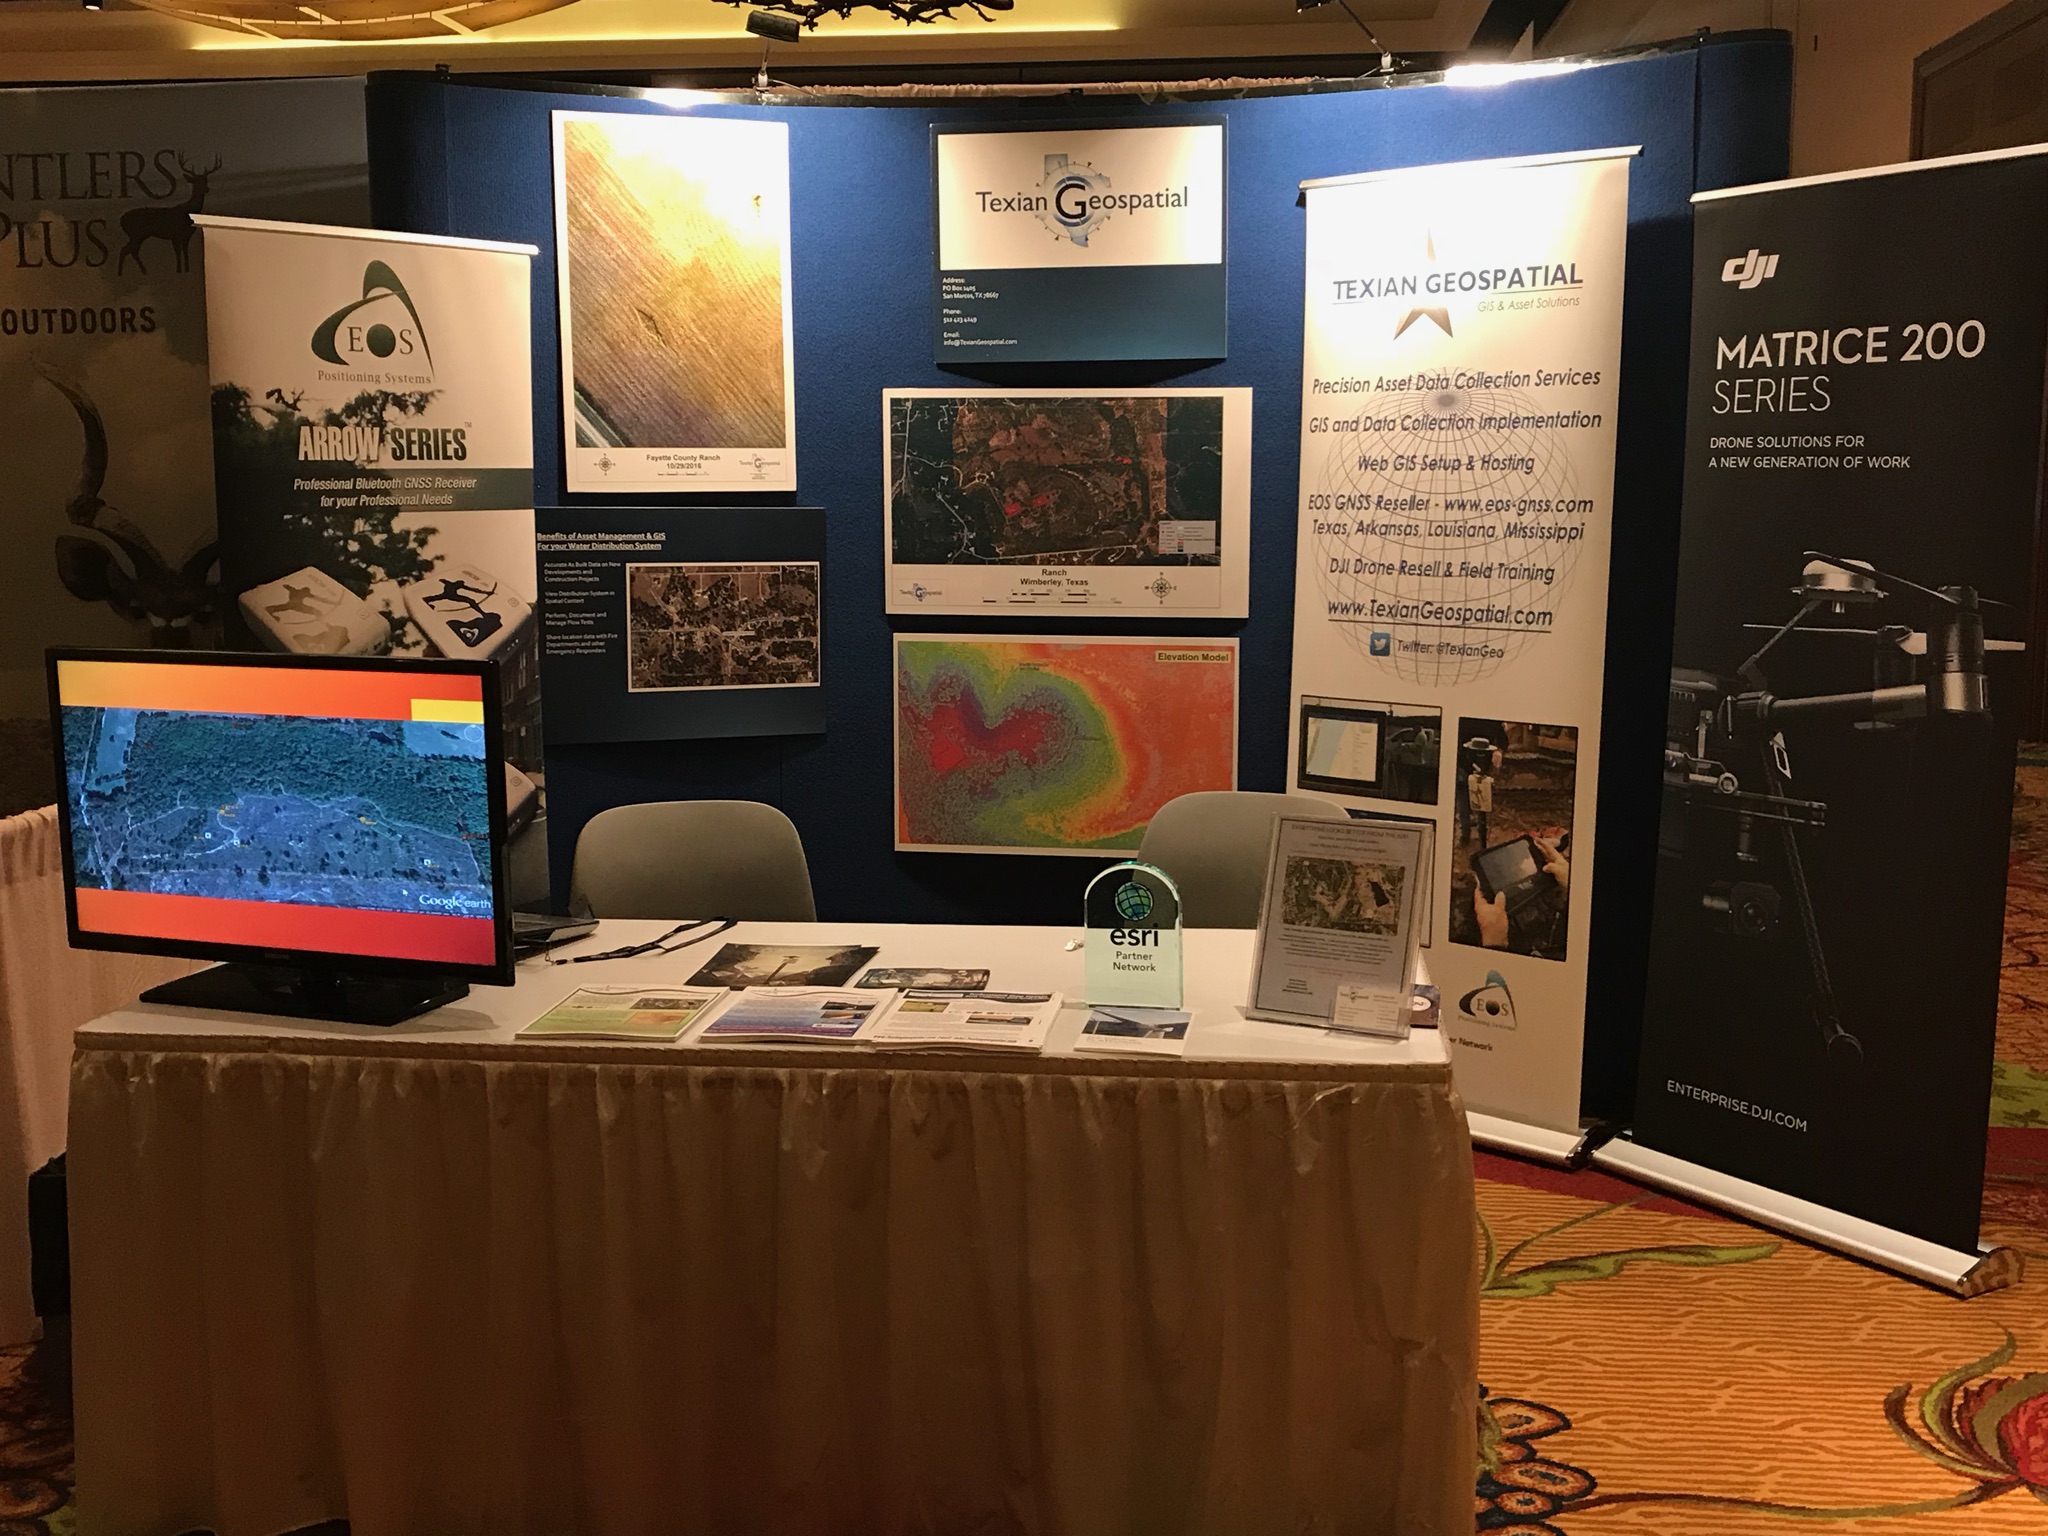 How to Find Eos at TWA Wildlife 2019 in San Antonio from July 11-14; Texas Wildlife Association; Texian Geospatial booth at the 2018 TWA